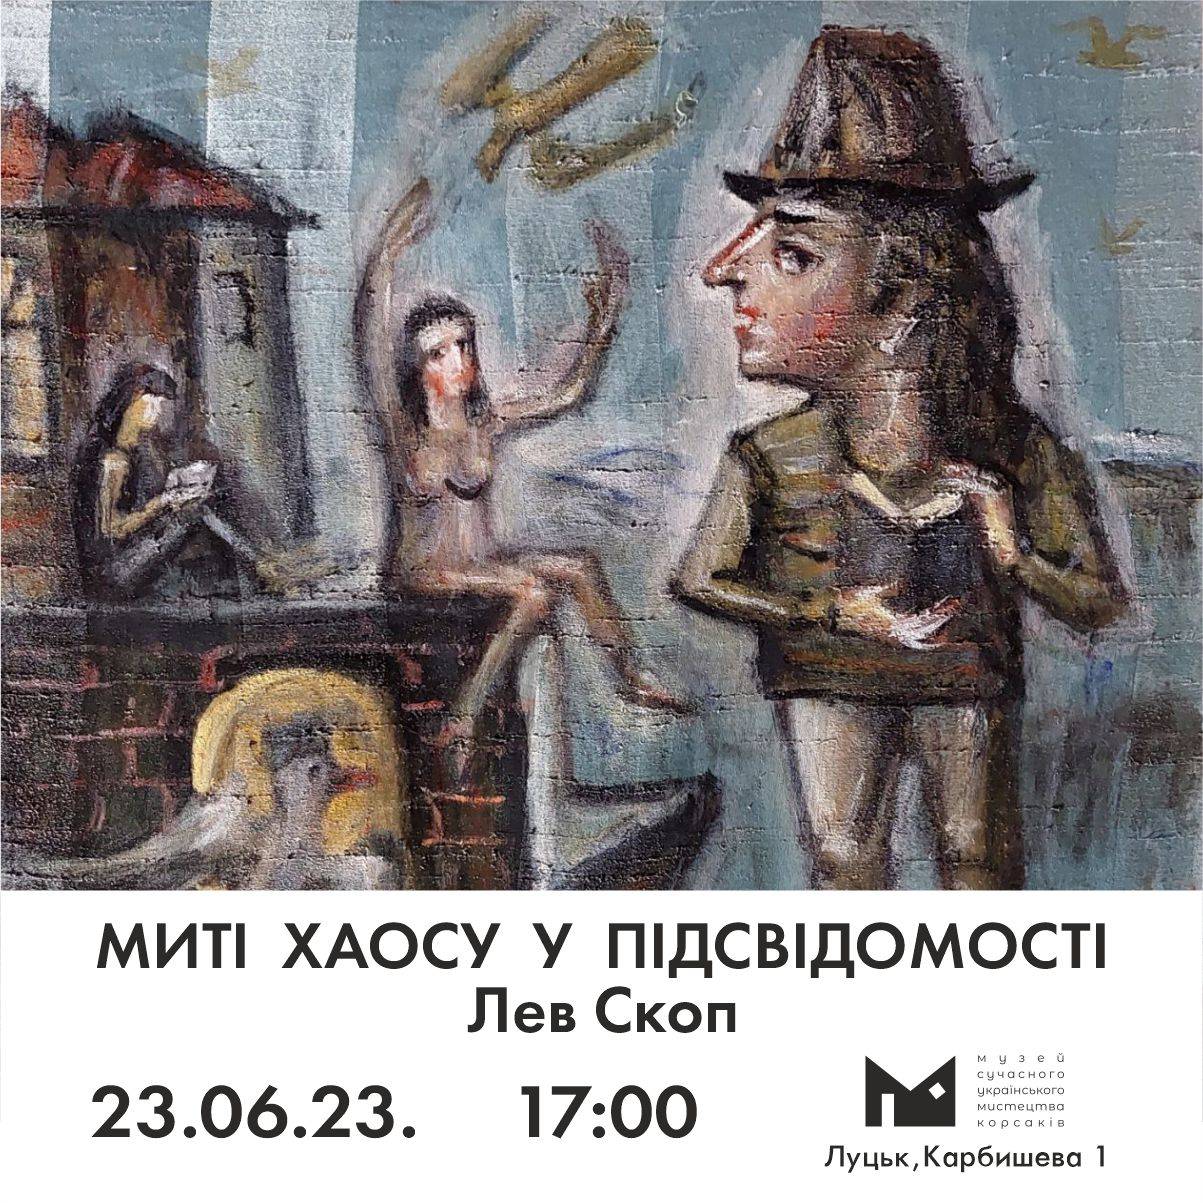 23.06. at 5:00 p.m. the Korsaks’ Museum will host the opening of Levko Skop’s project “Moments of Chaos in the Subconscious”!